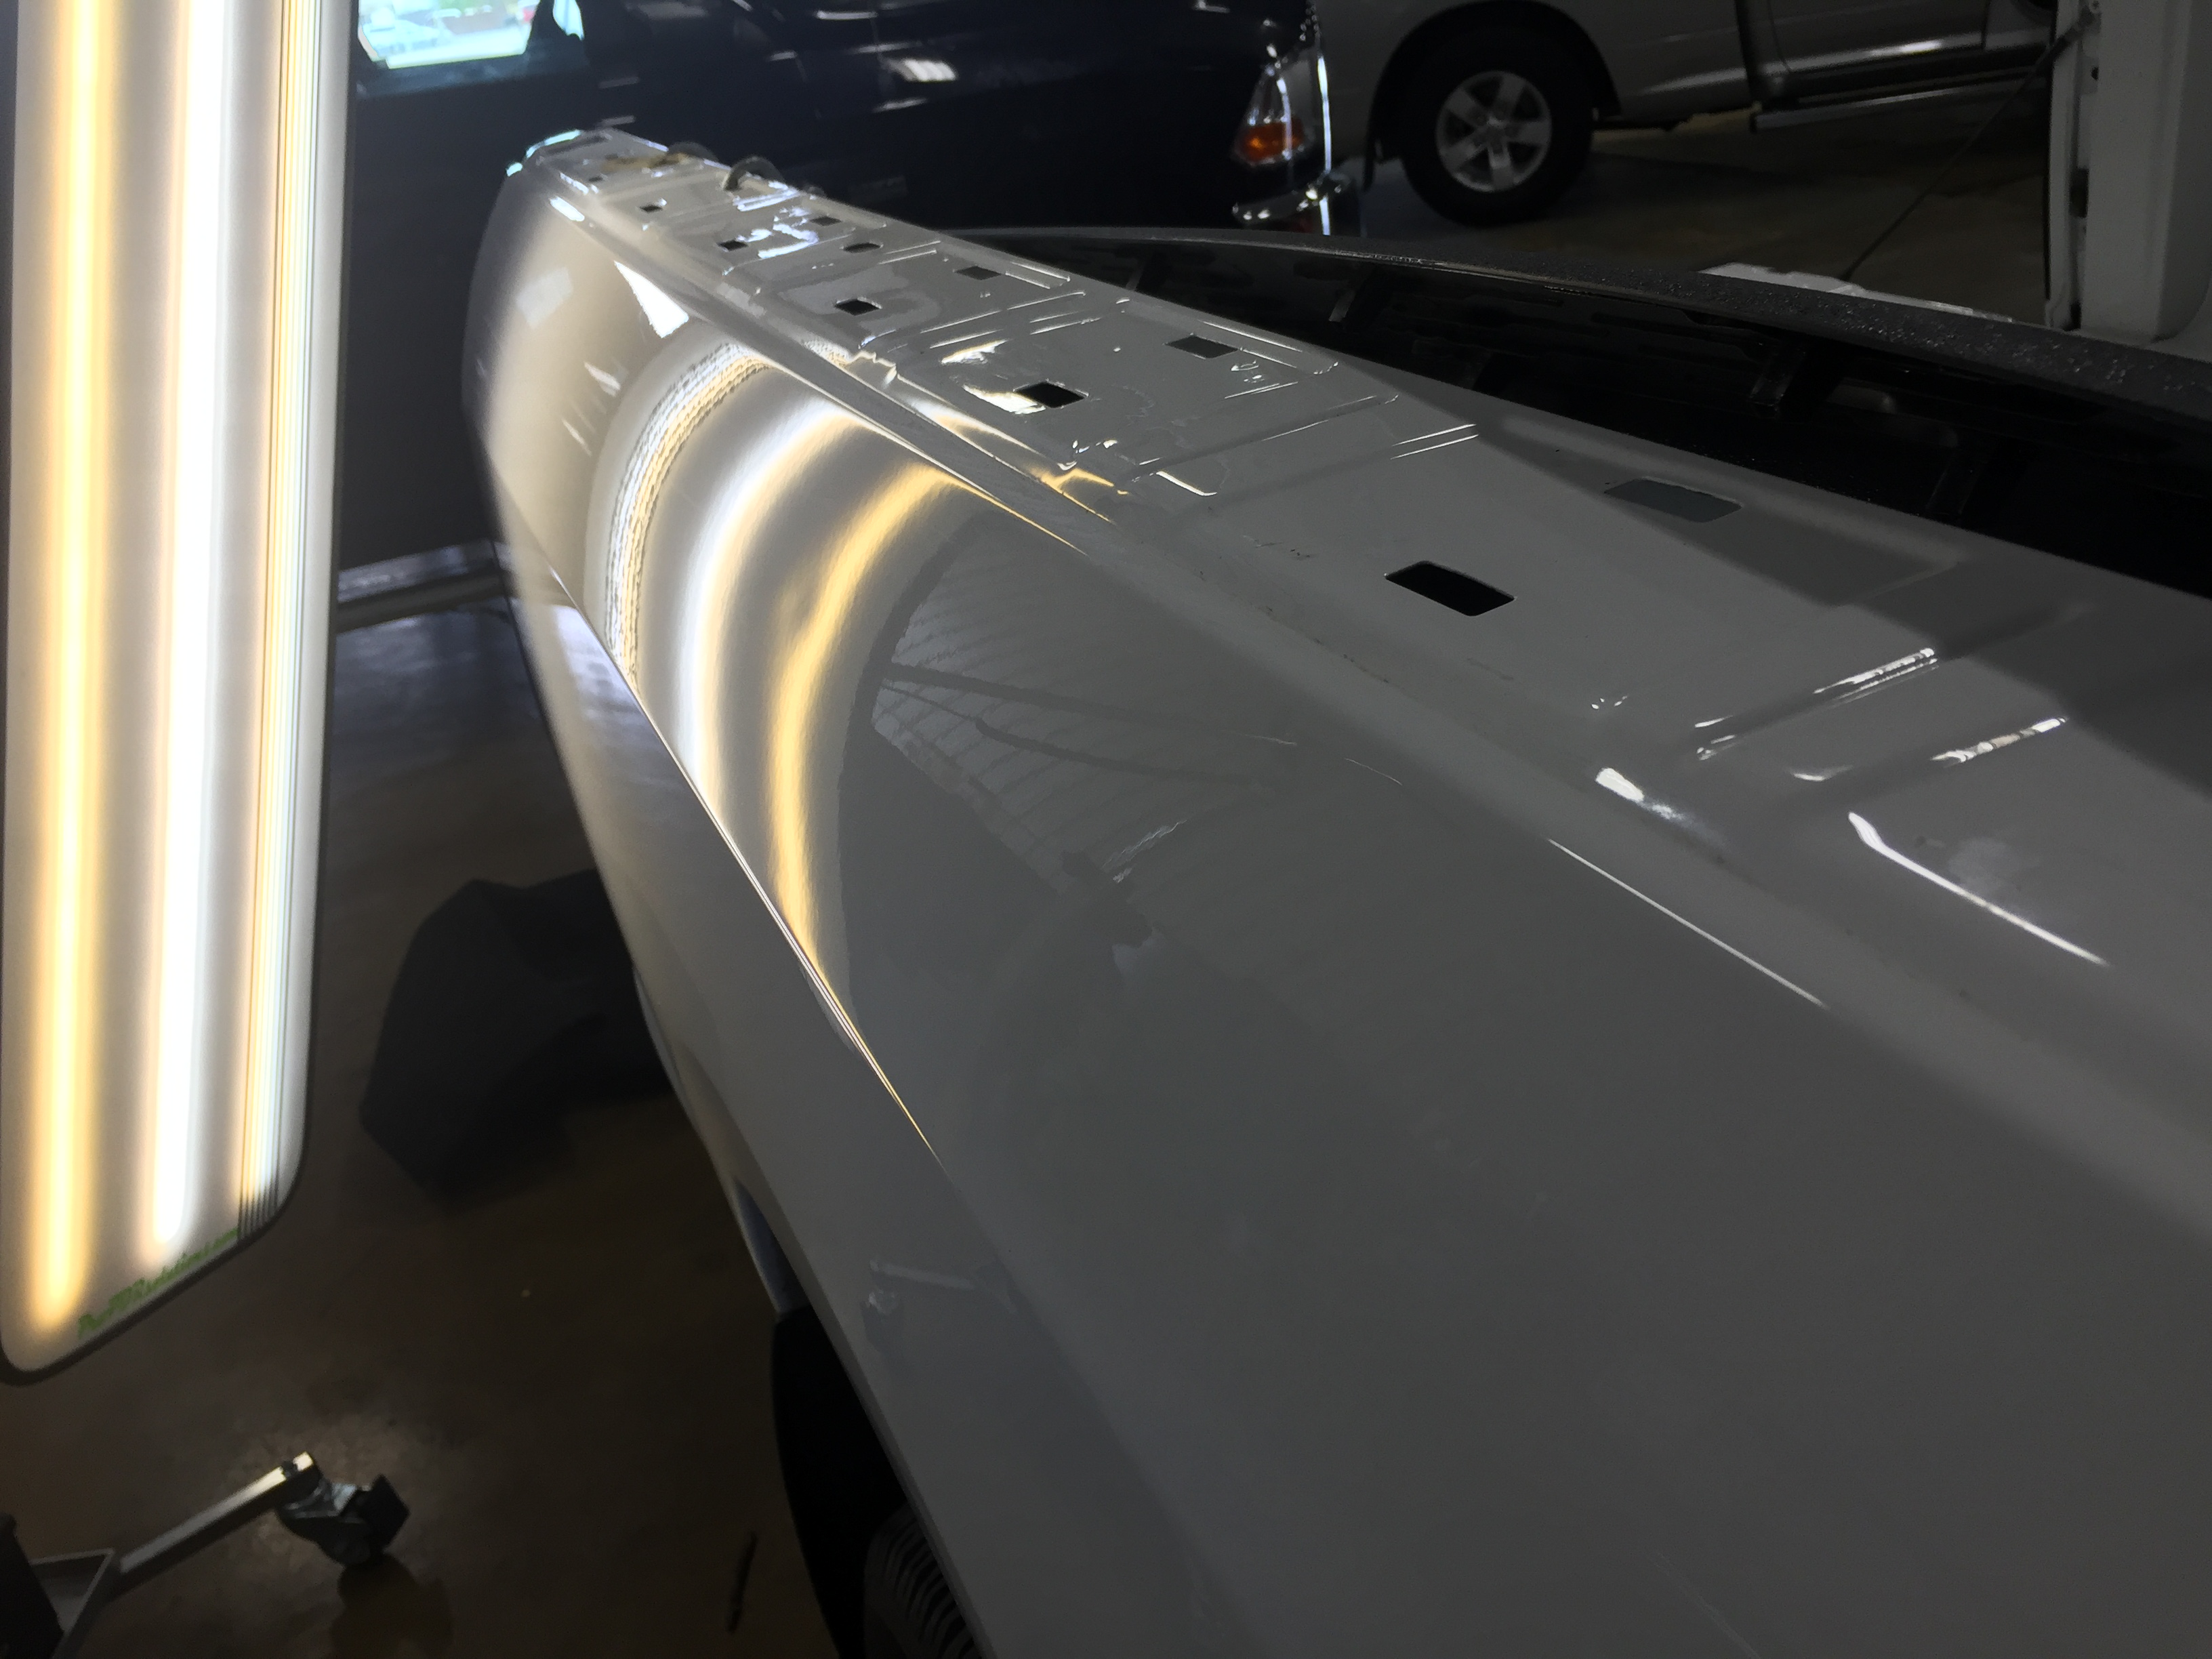 2013 Dodge Ram Dent in Bed side of Vehicle, Removed with Mobile Dent Removal Springfield IL, http://217dent.com